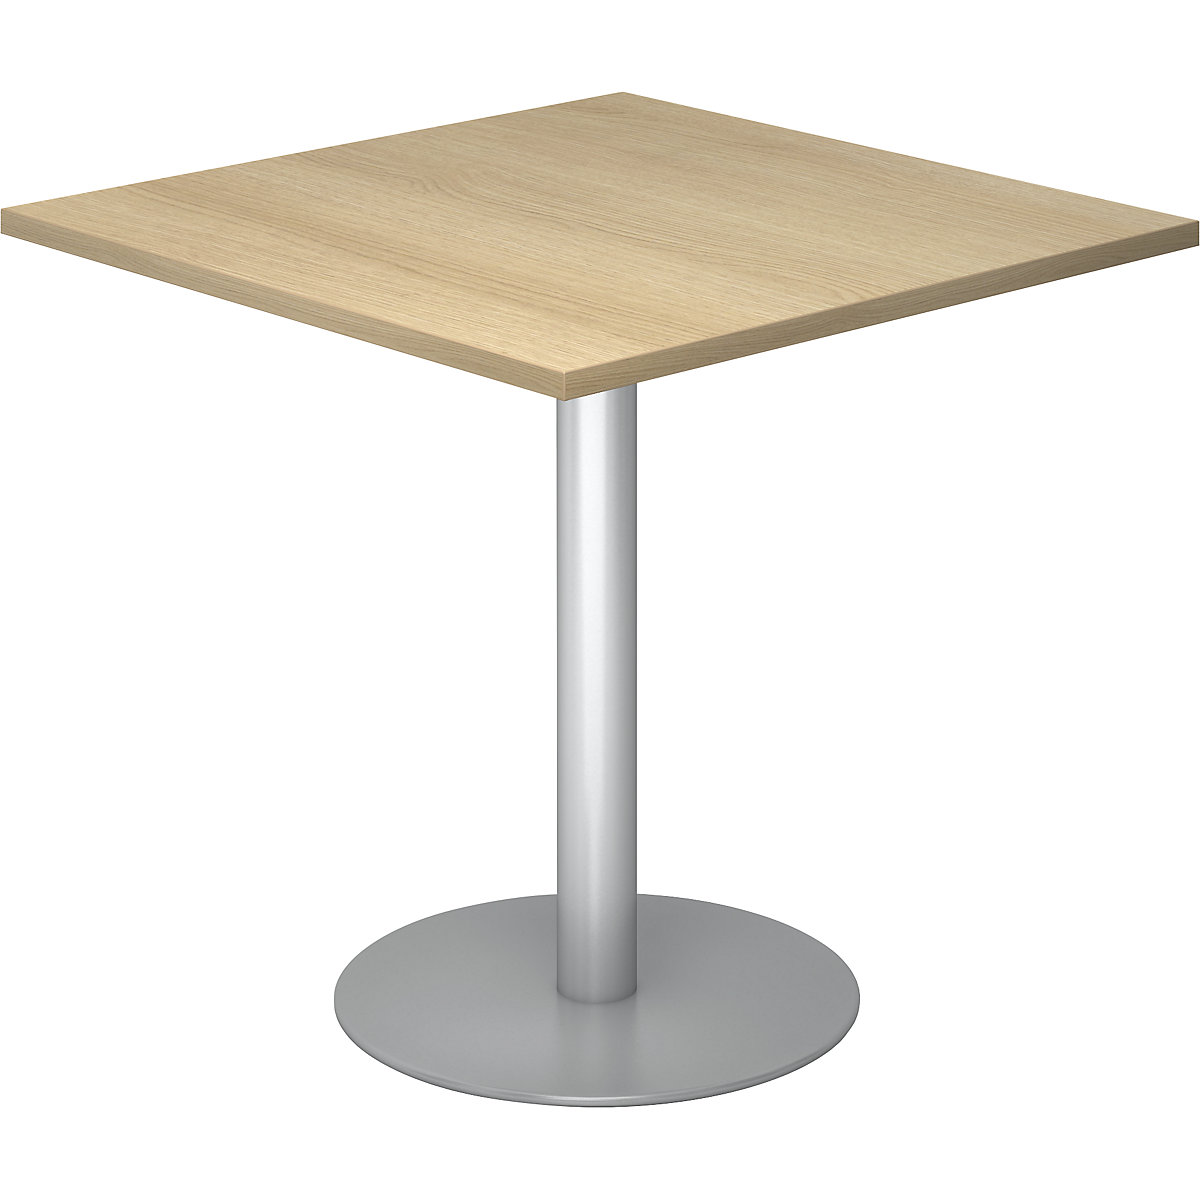 Conference table, LxW 800 x 800 mm, 755 mm high, silver frame, tabletop in oak finish-3